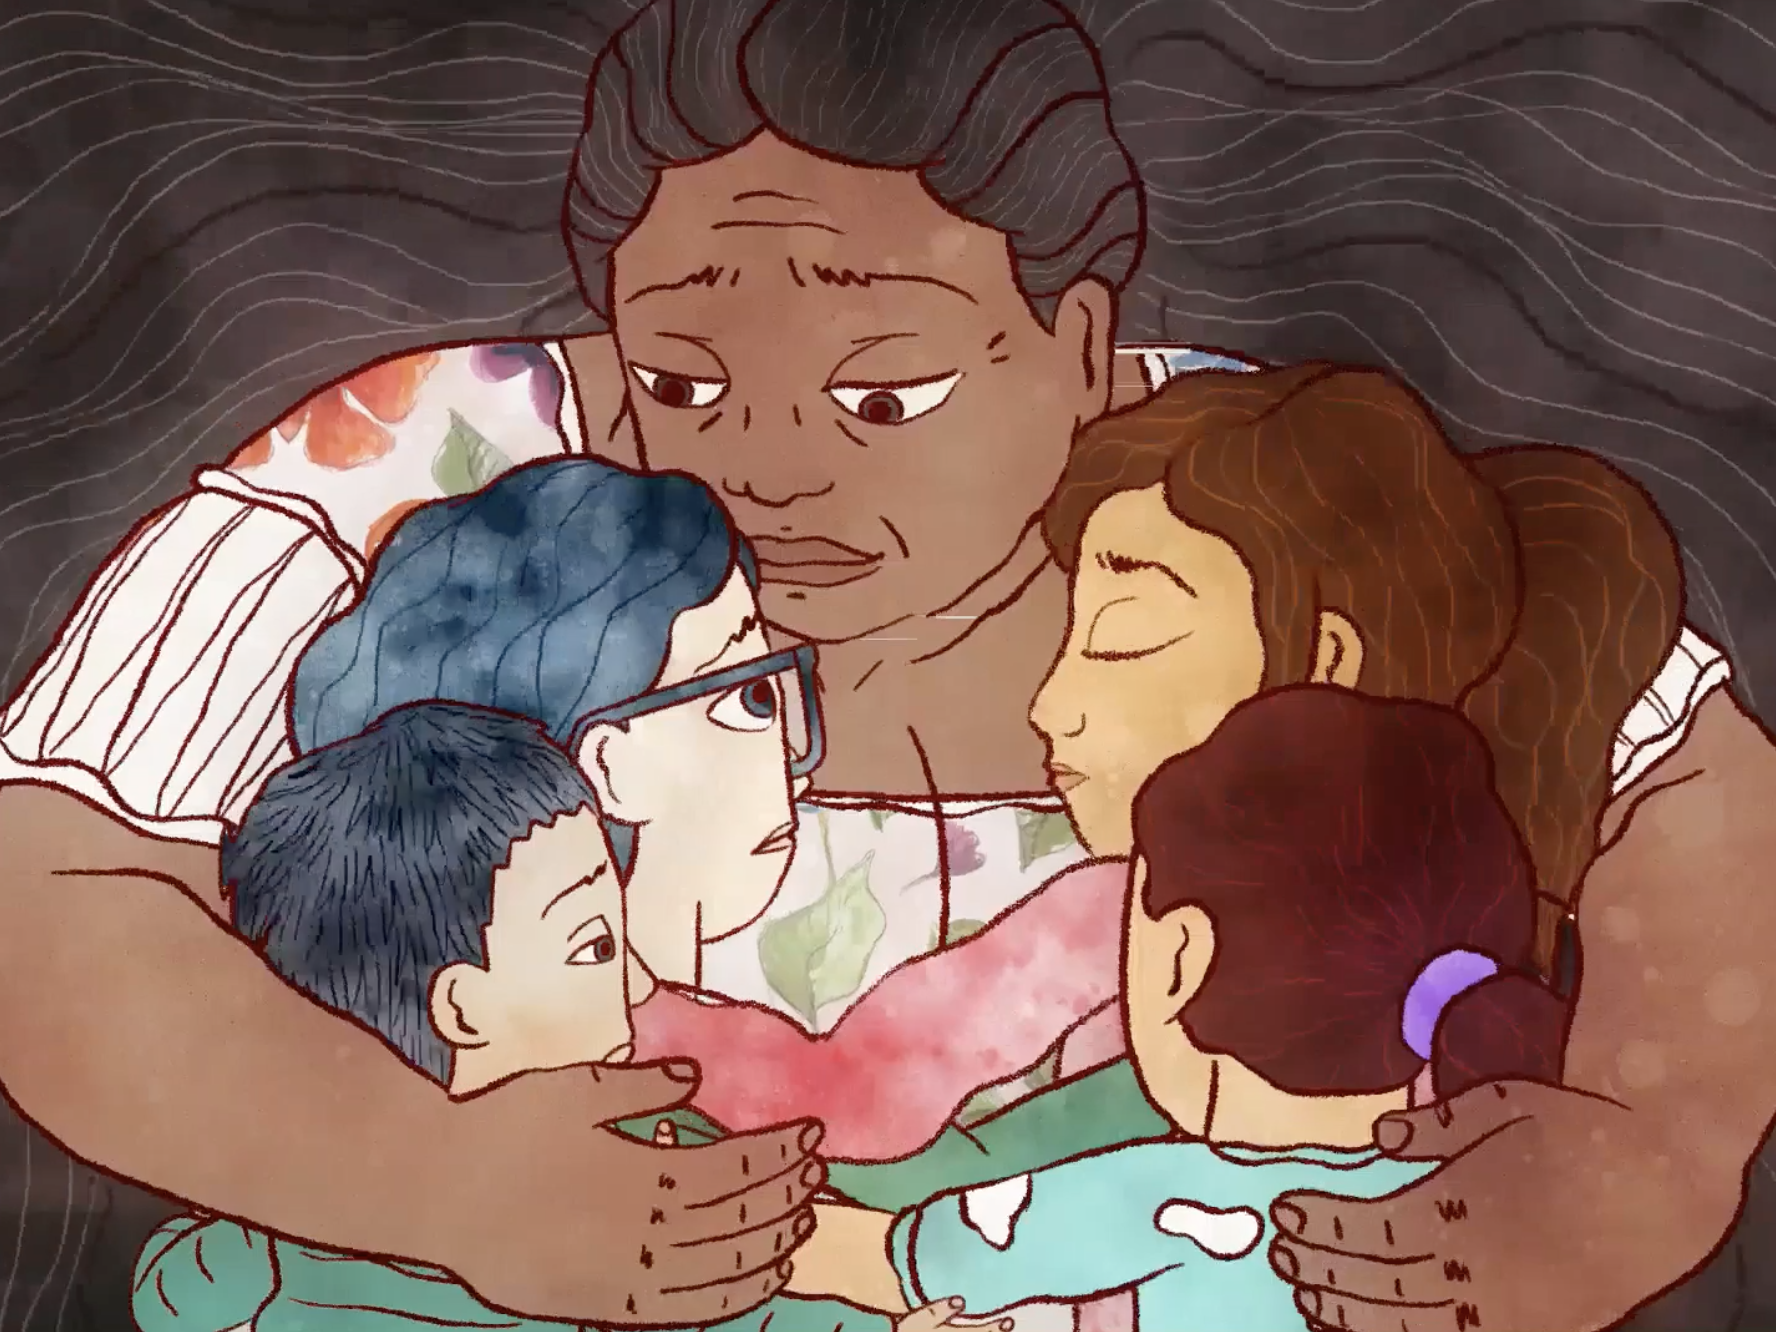 a drawing of a woman with extremely long hair hugging four children in her arms.